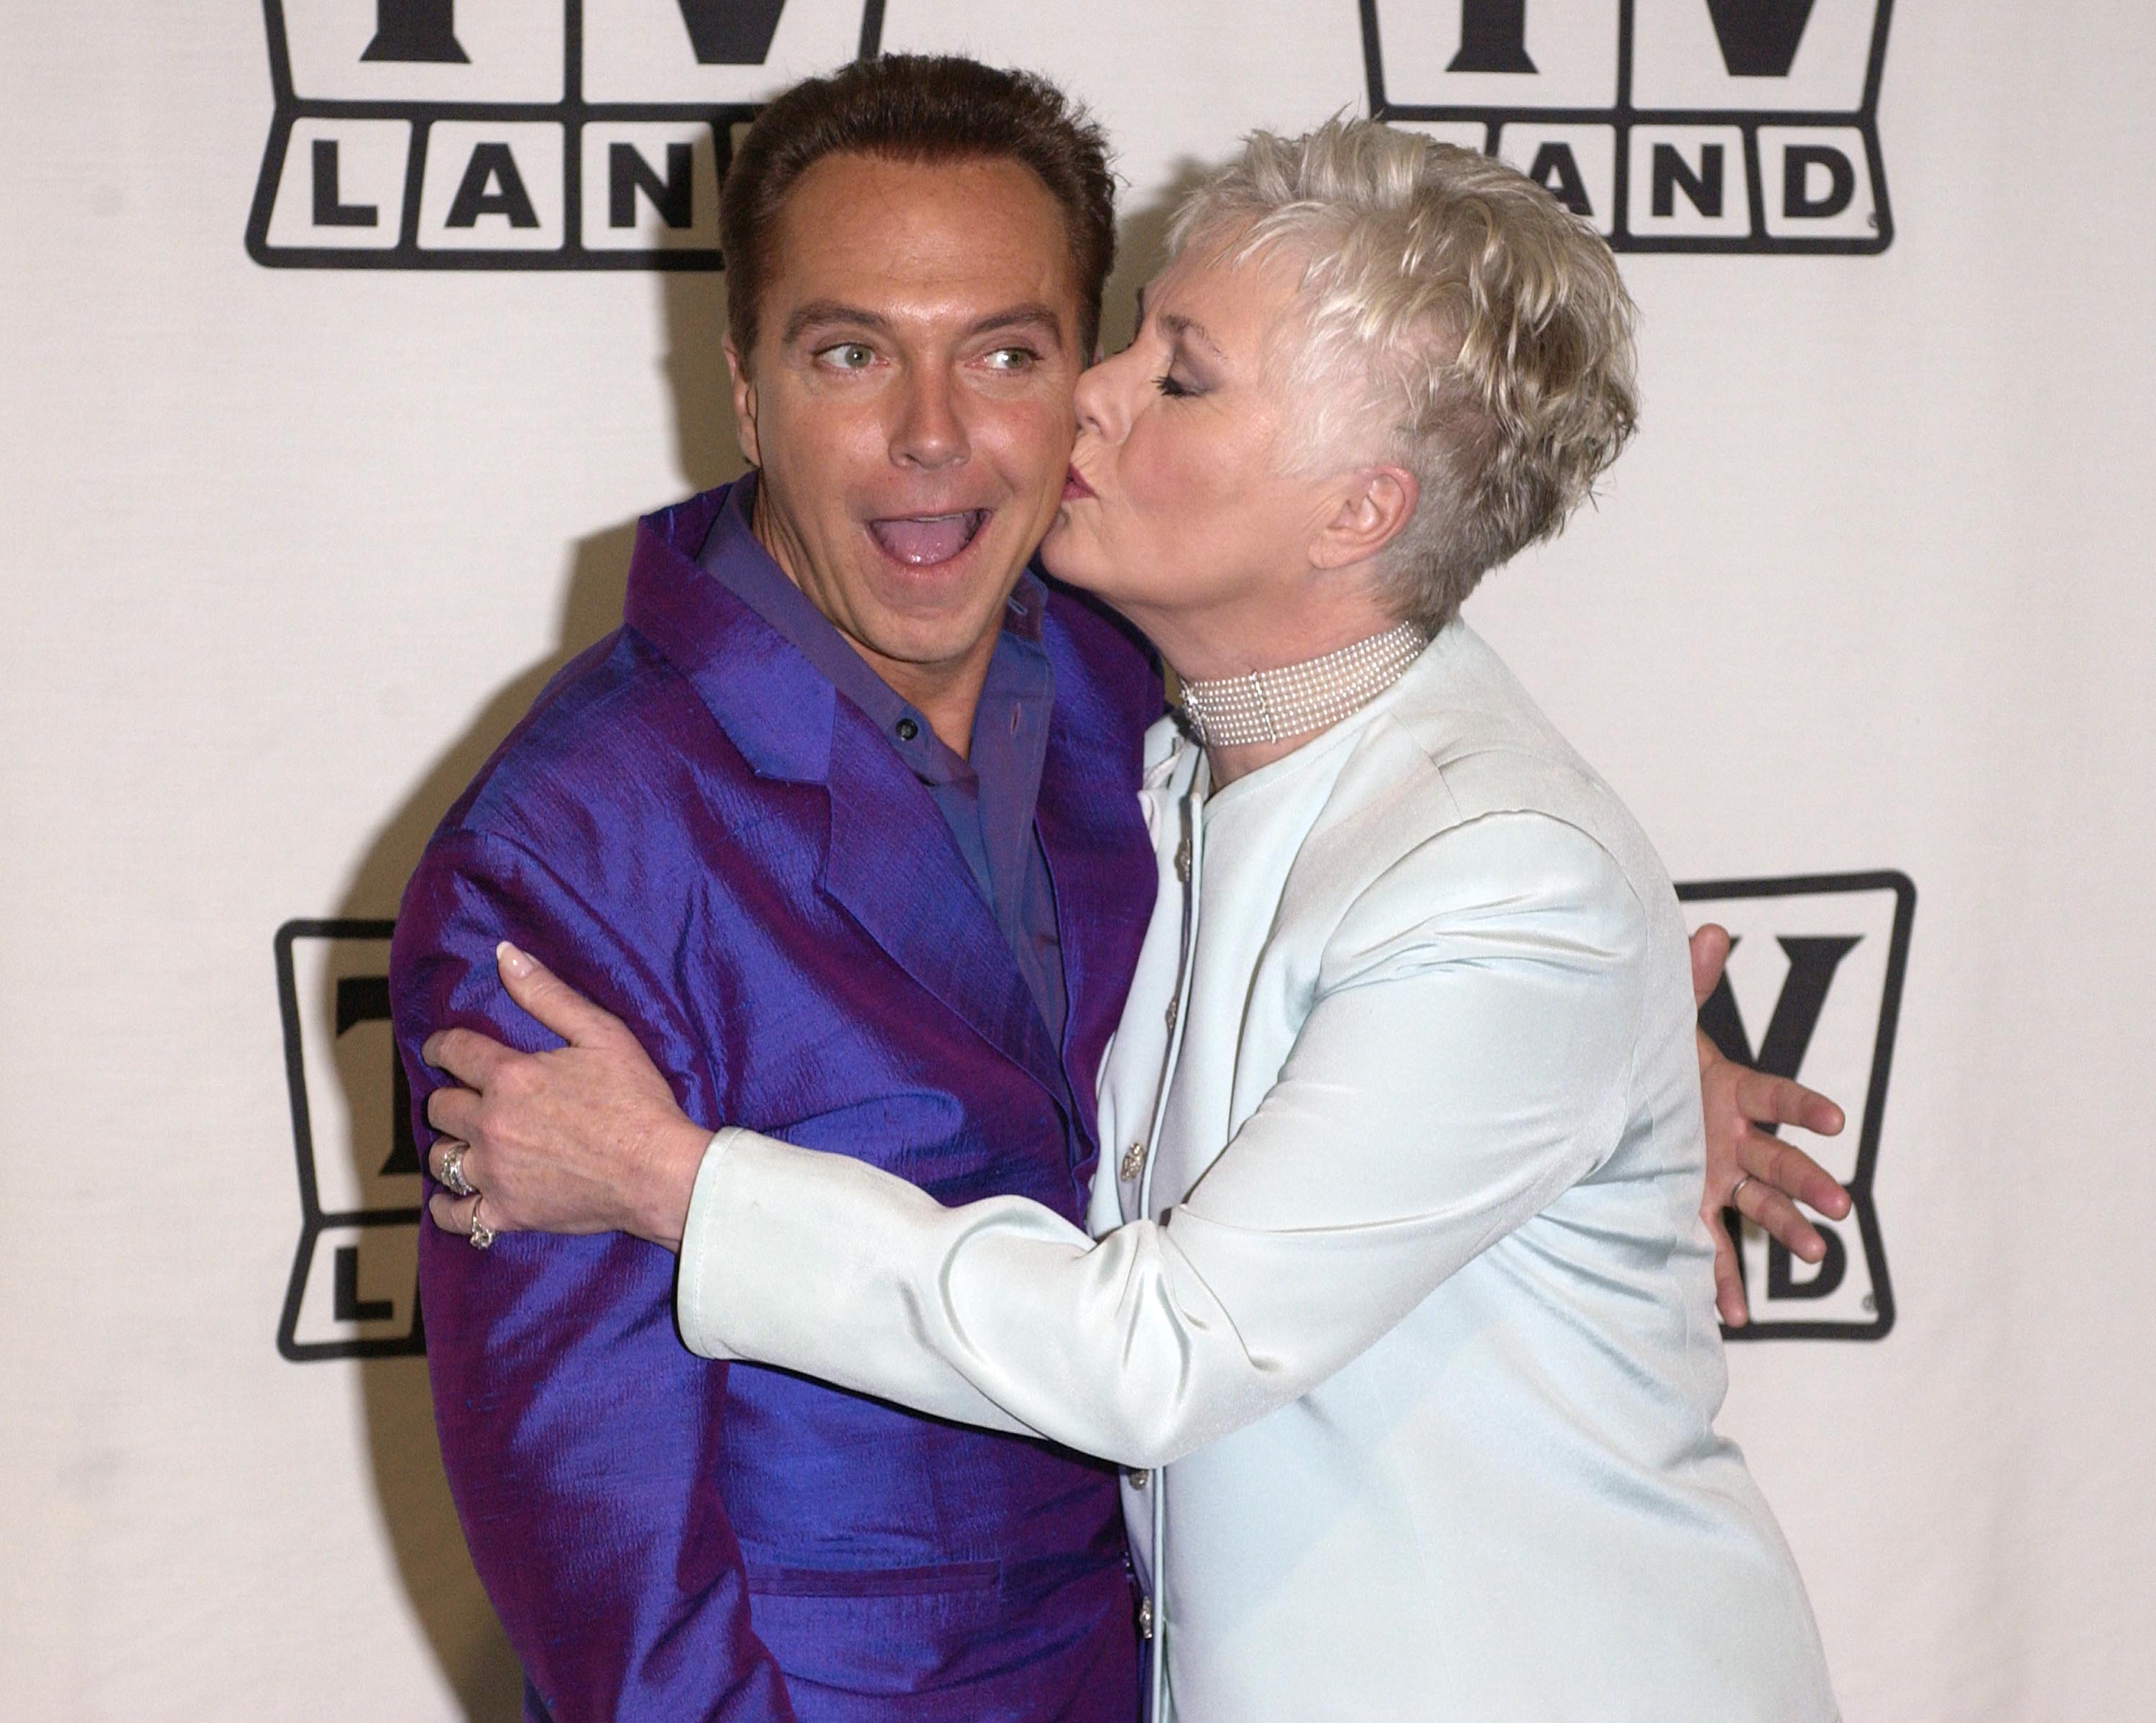 David Cassidy kisses Shirley Jones on the back of the stage at the TV Land Awards 2003 at the Hollywood Palladium on March 2, 2003 in Hollywood, California.  |  |  Photo: Getty Images